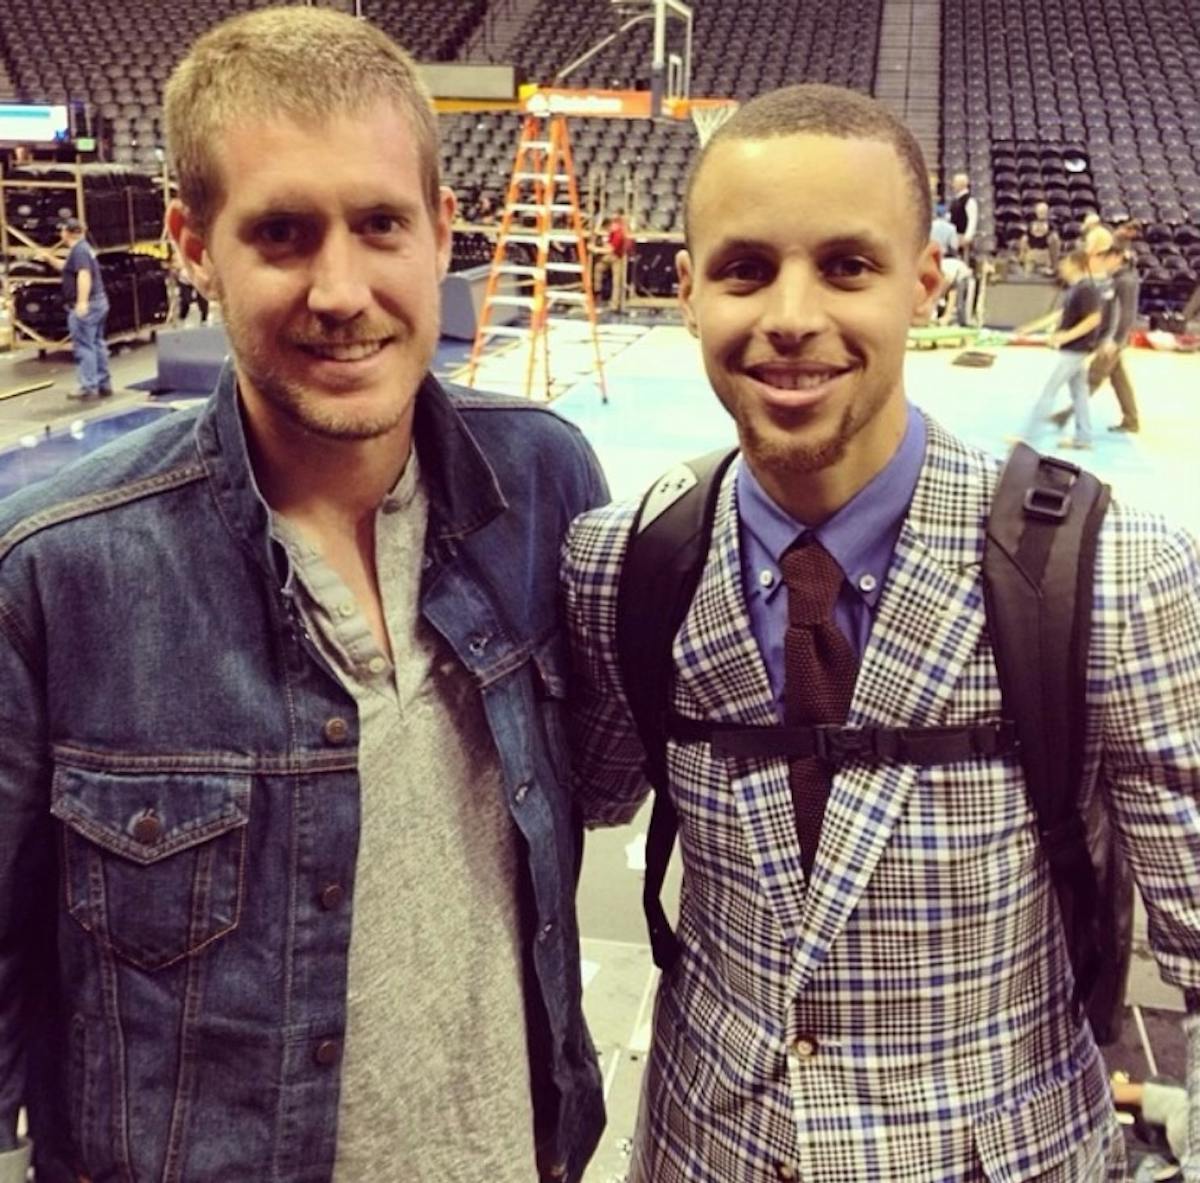 Loons goalkeeper's friendship with Steph Curry dates to middle school